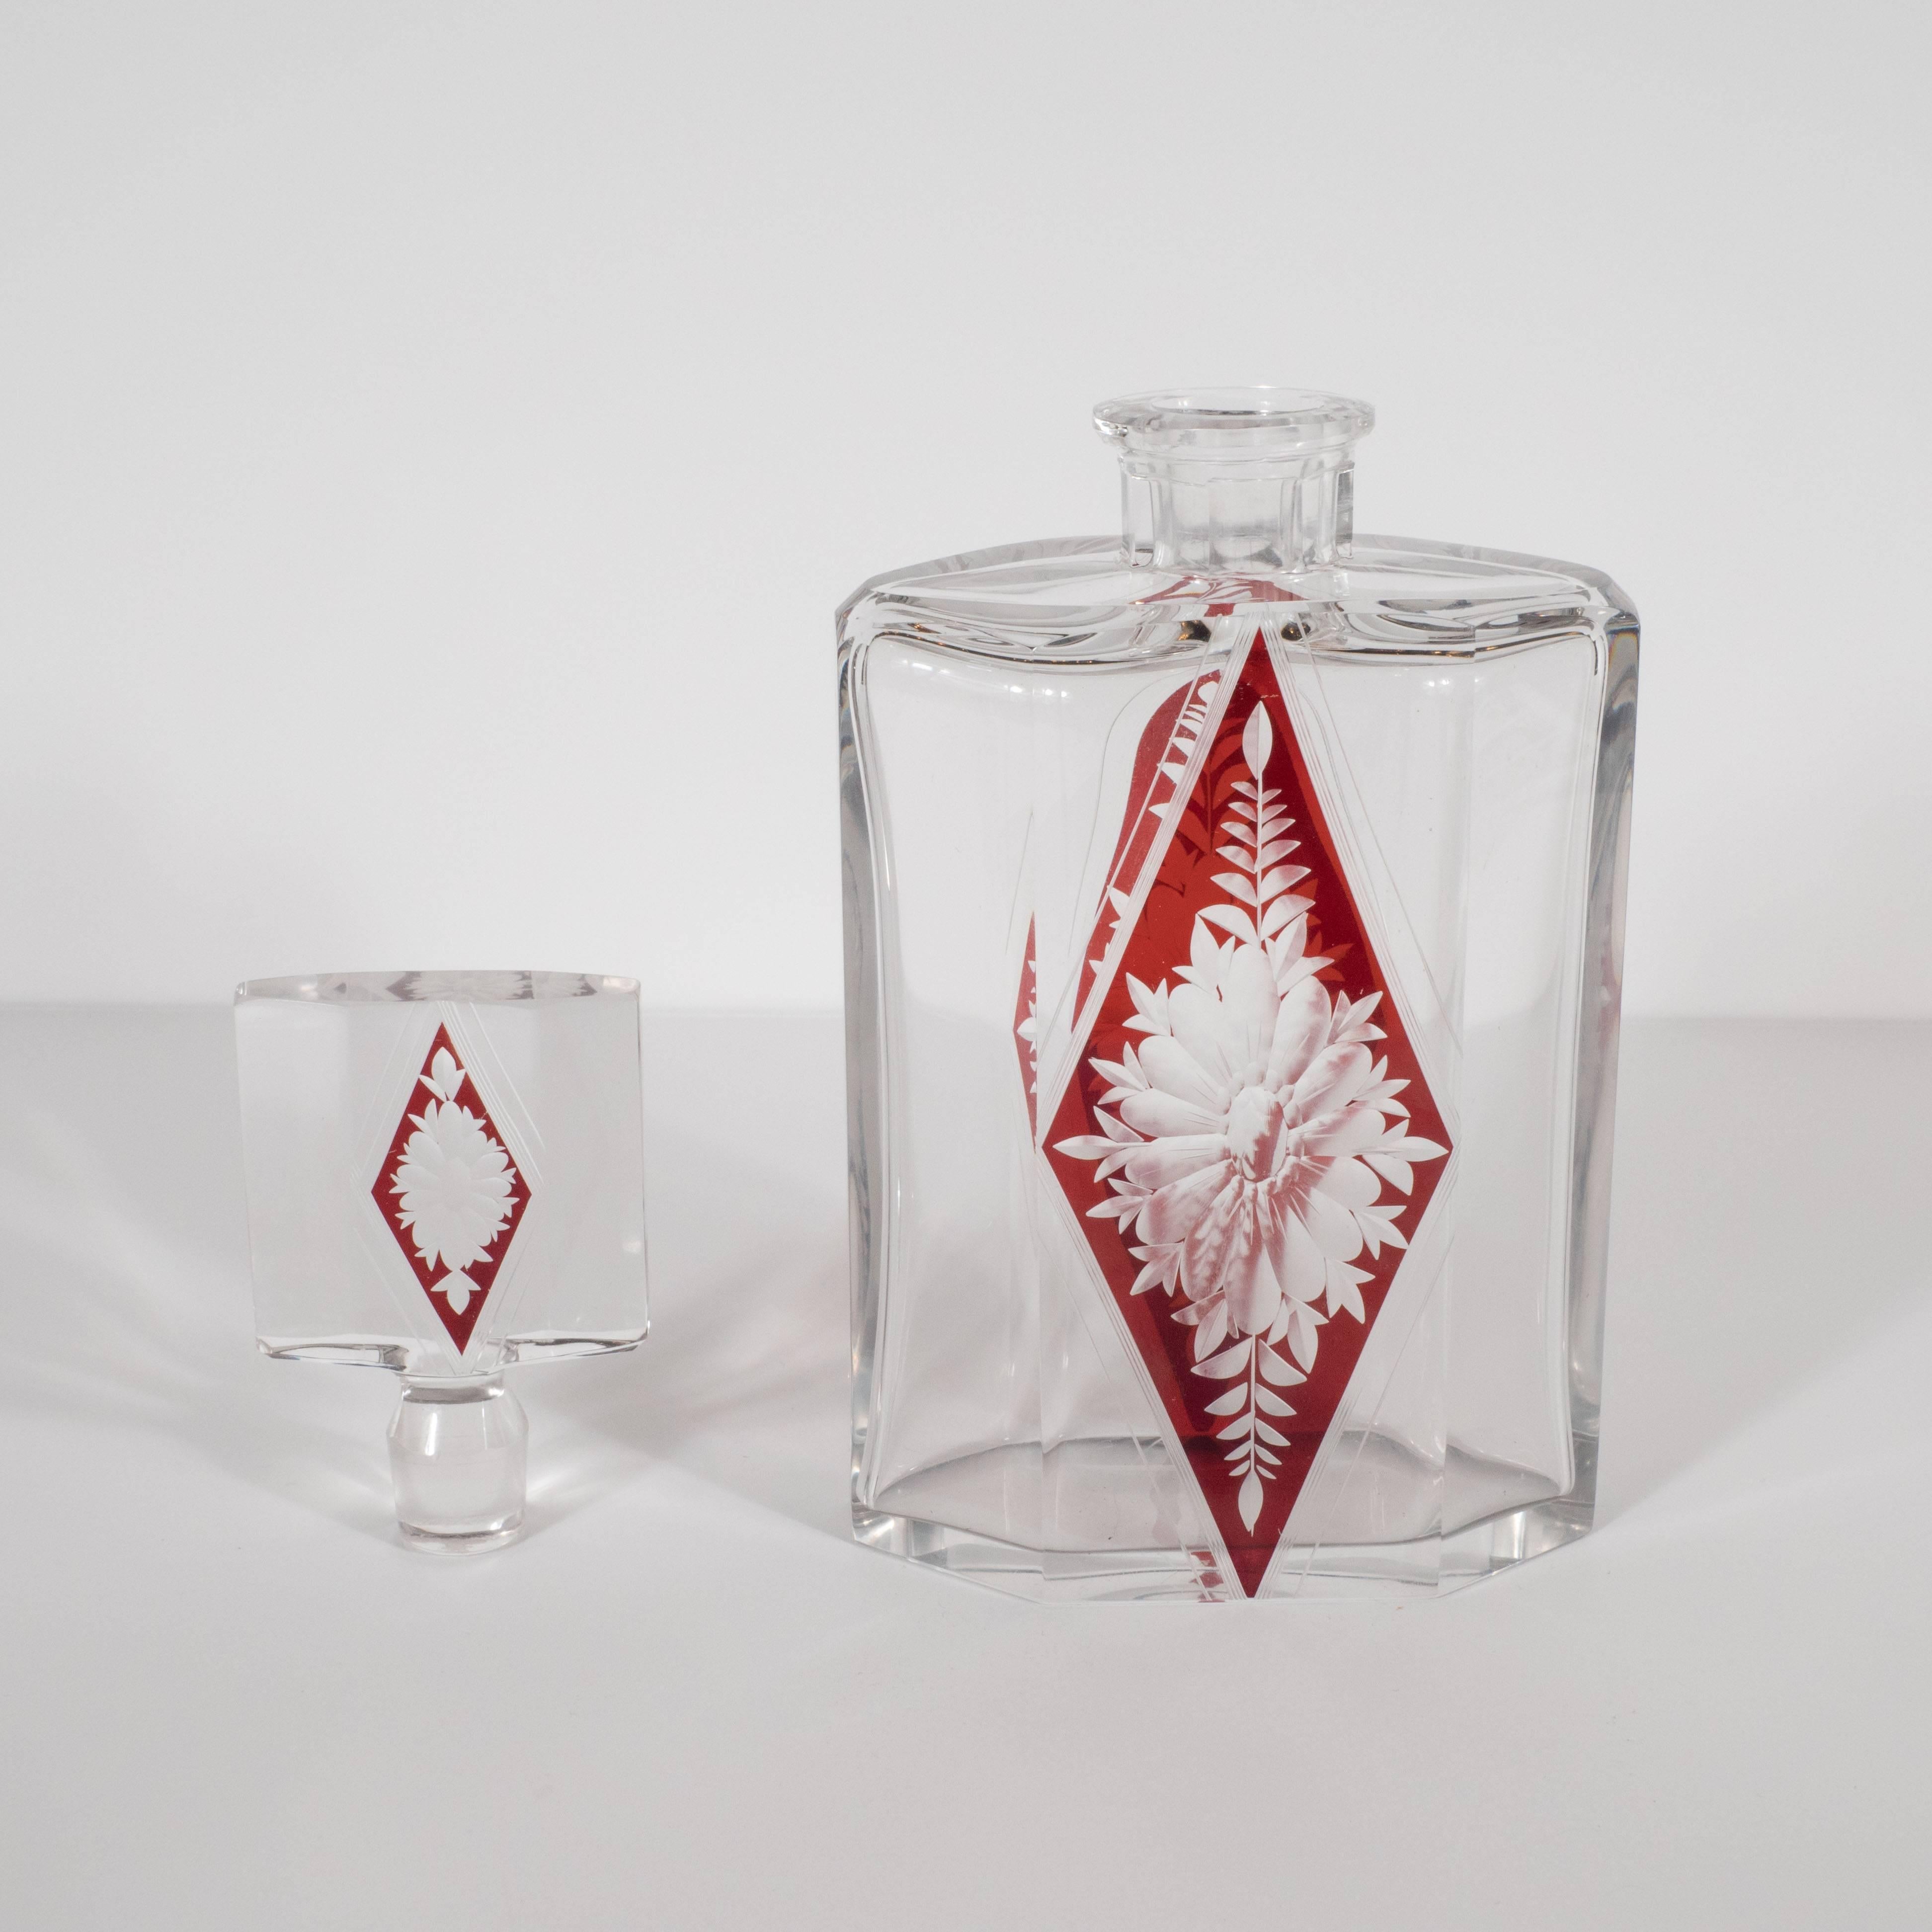 Mid-20th Century Art Deco Czech Crystal Decanter with Stained Cardinal Red Glass and Floral Motif